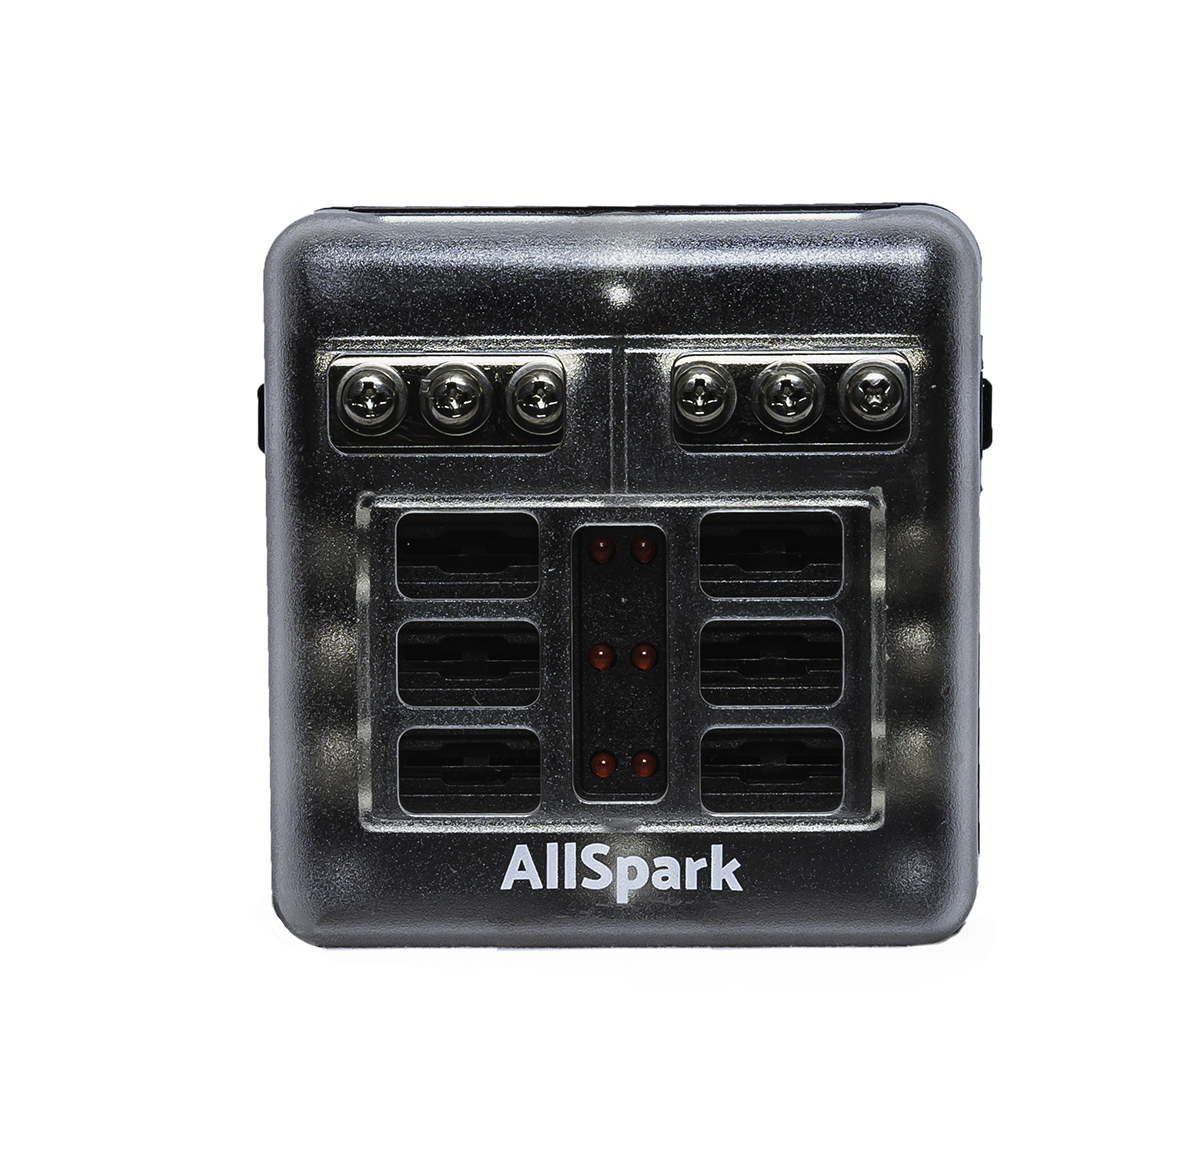 AllSpark Surface Mount Fuse block with indication light - 6 Way